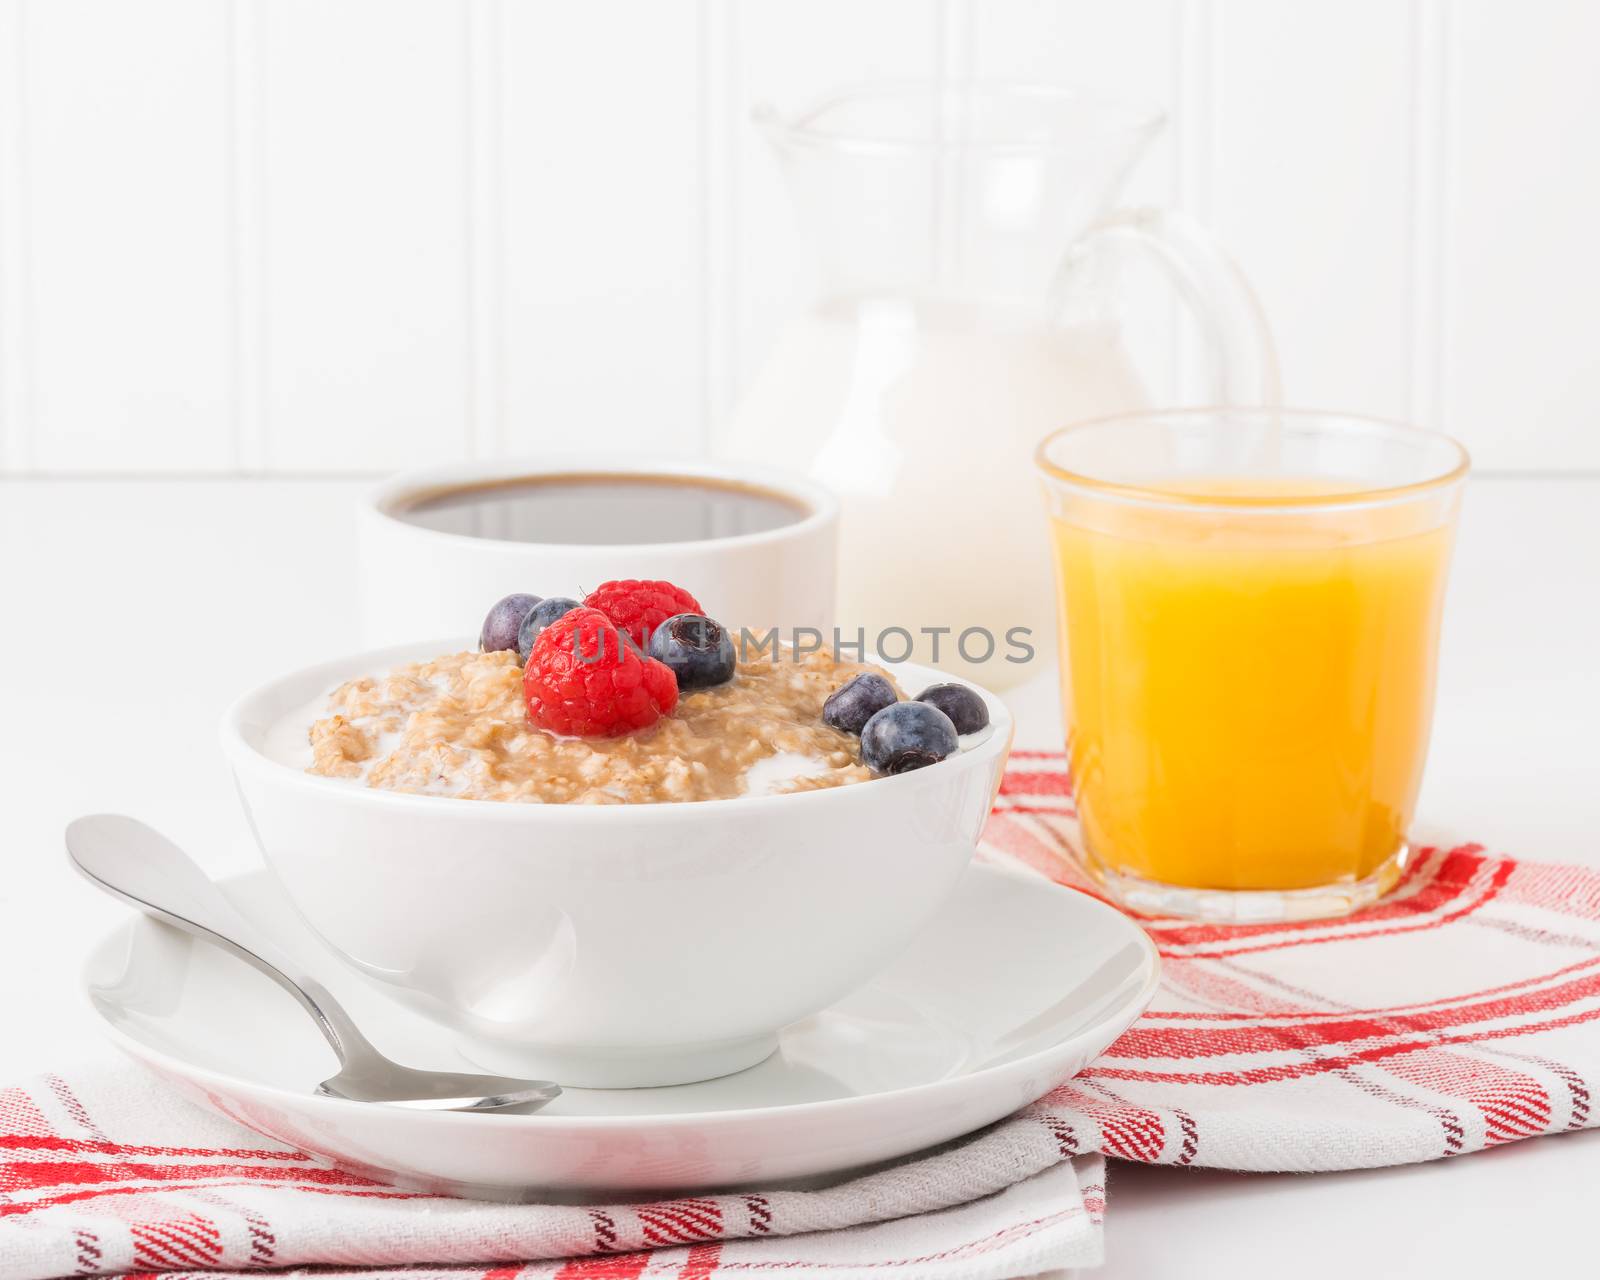 Oatmeal by billberryphotography